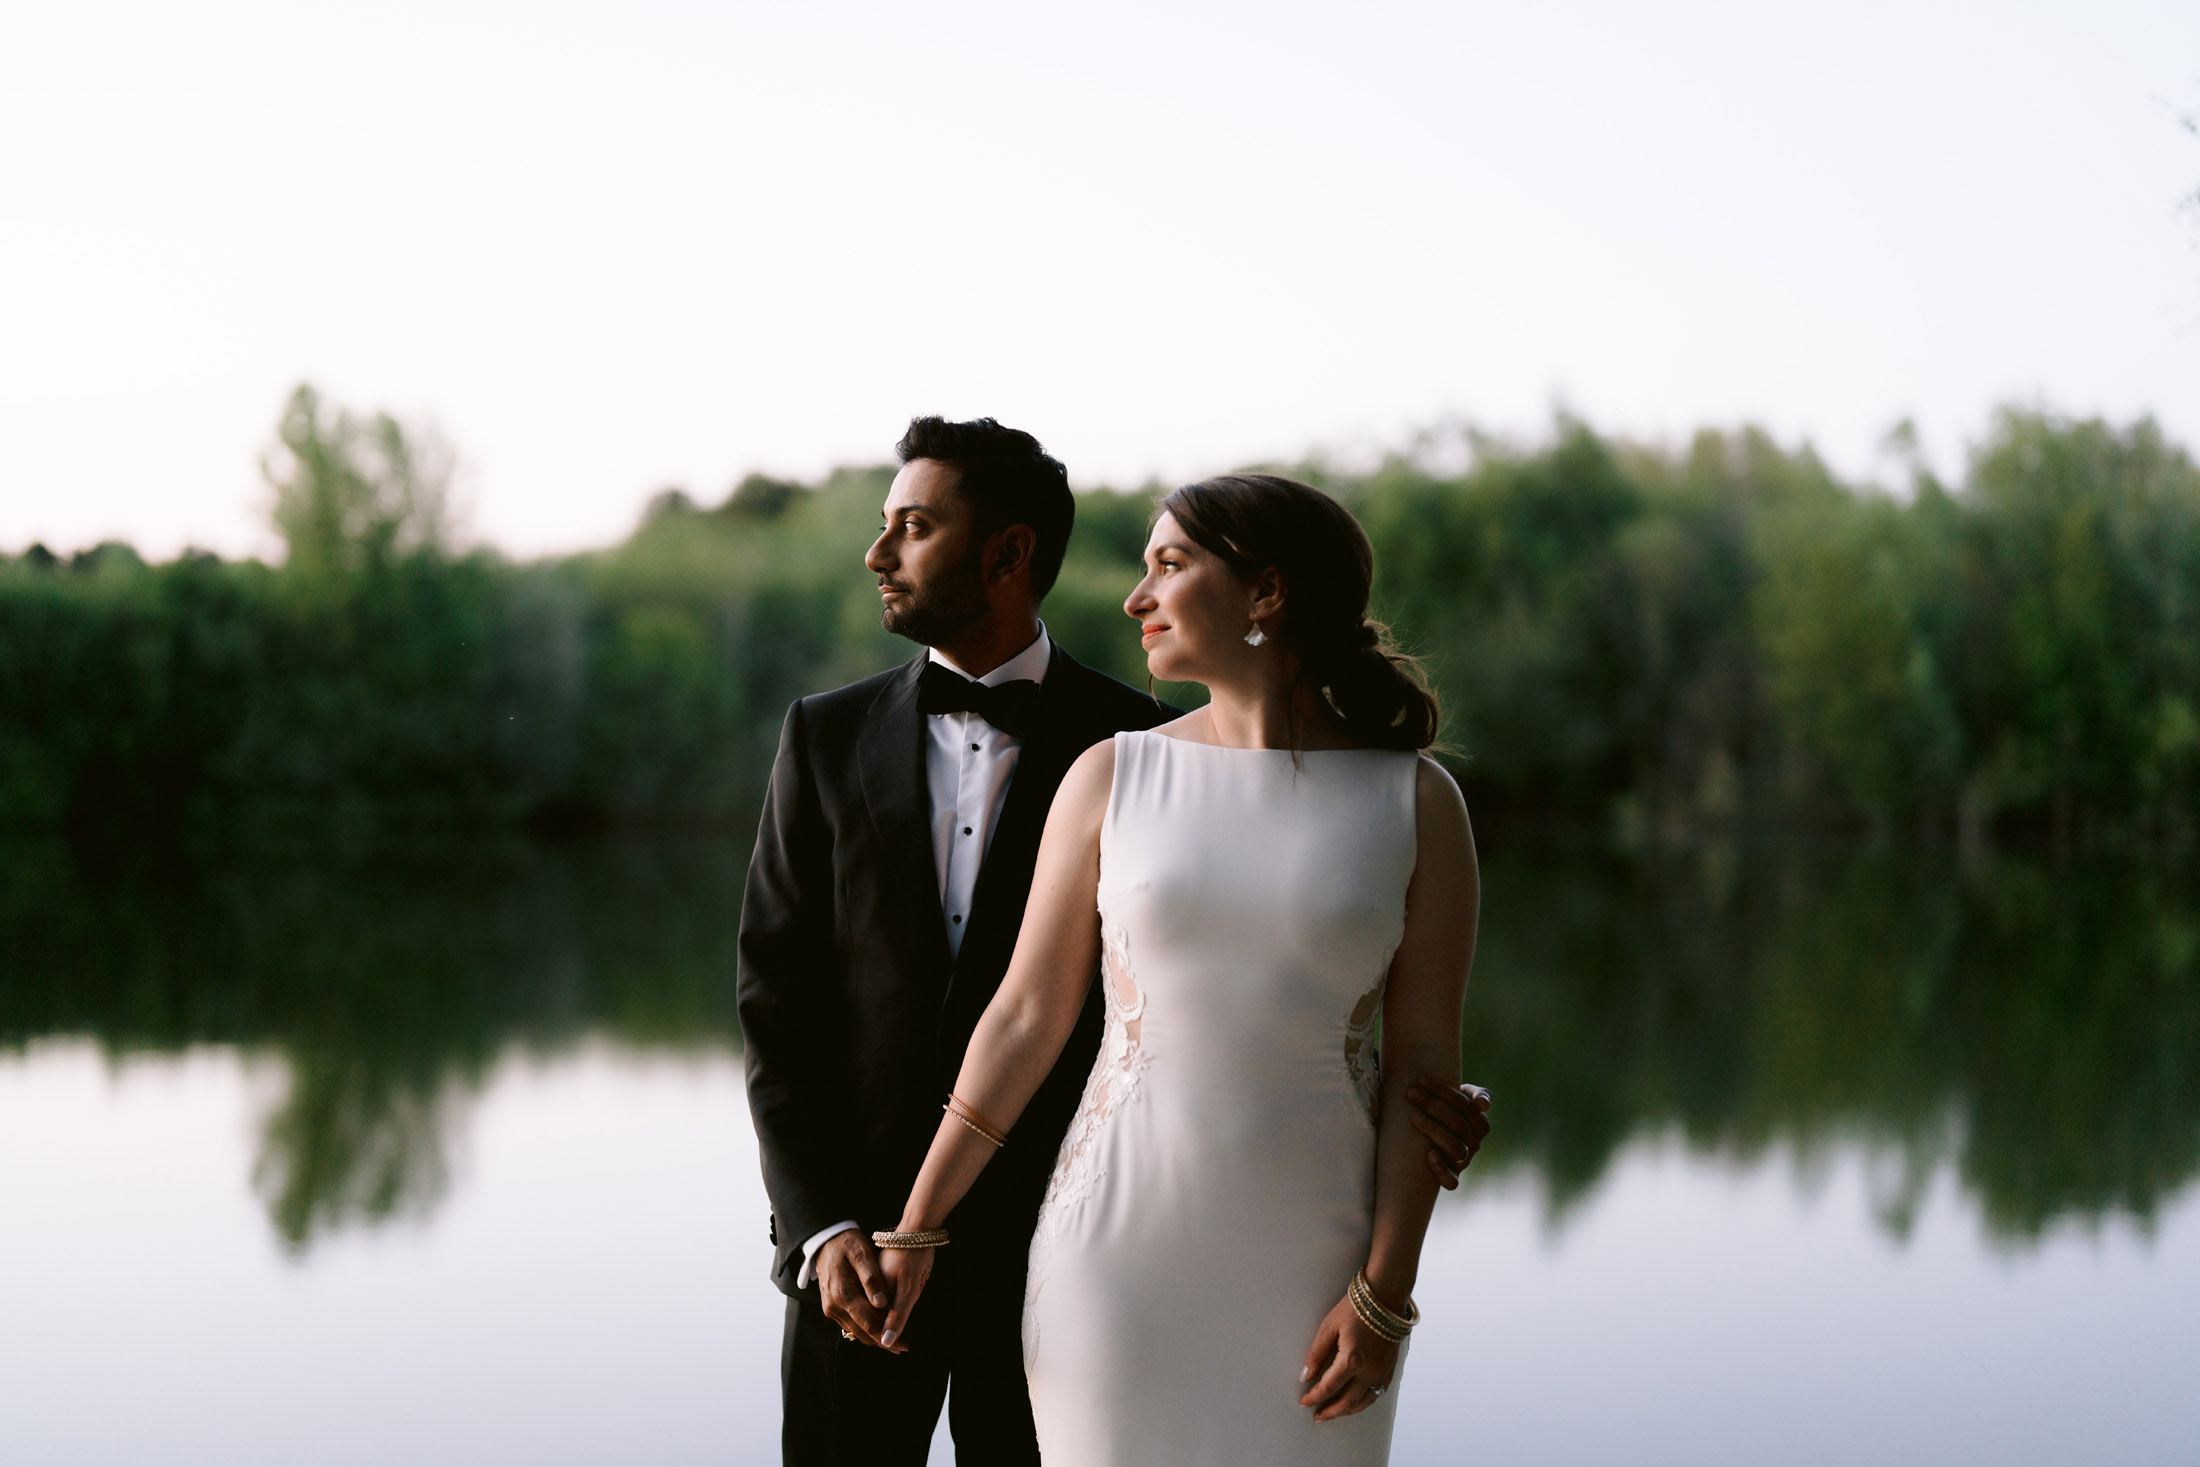 hindu wedding couple by the lake at nunsmere hall groom is wearing tuxedo and bride a white dress